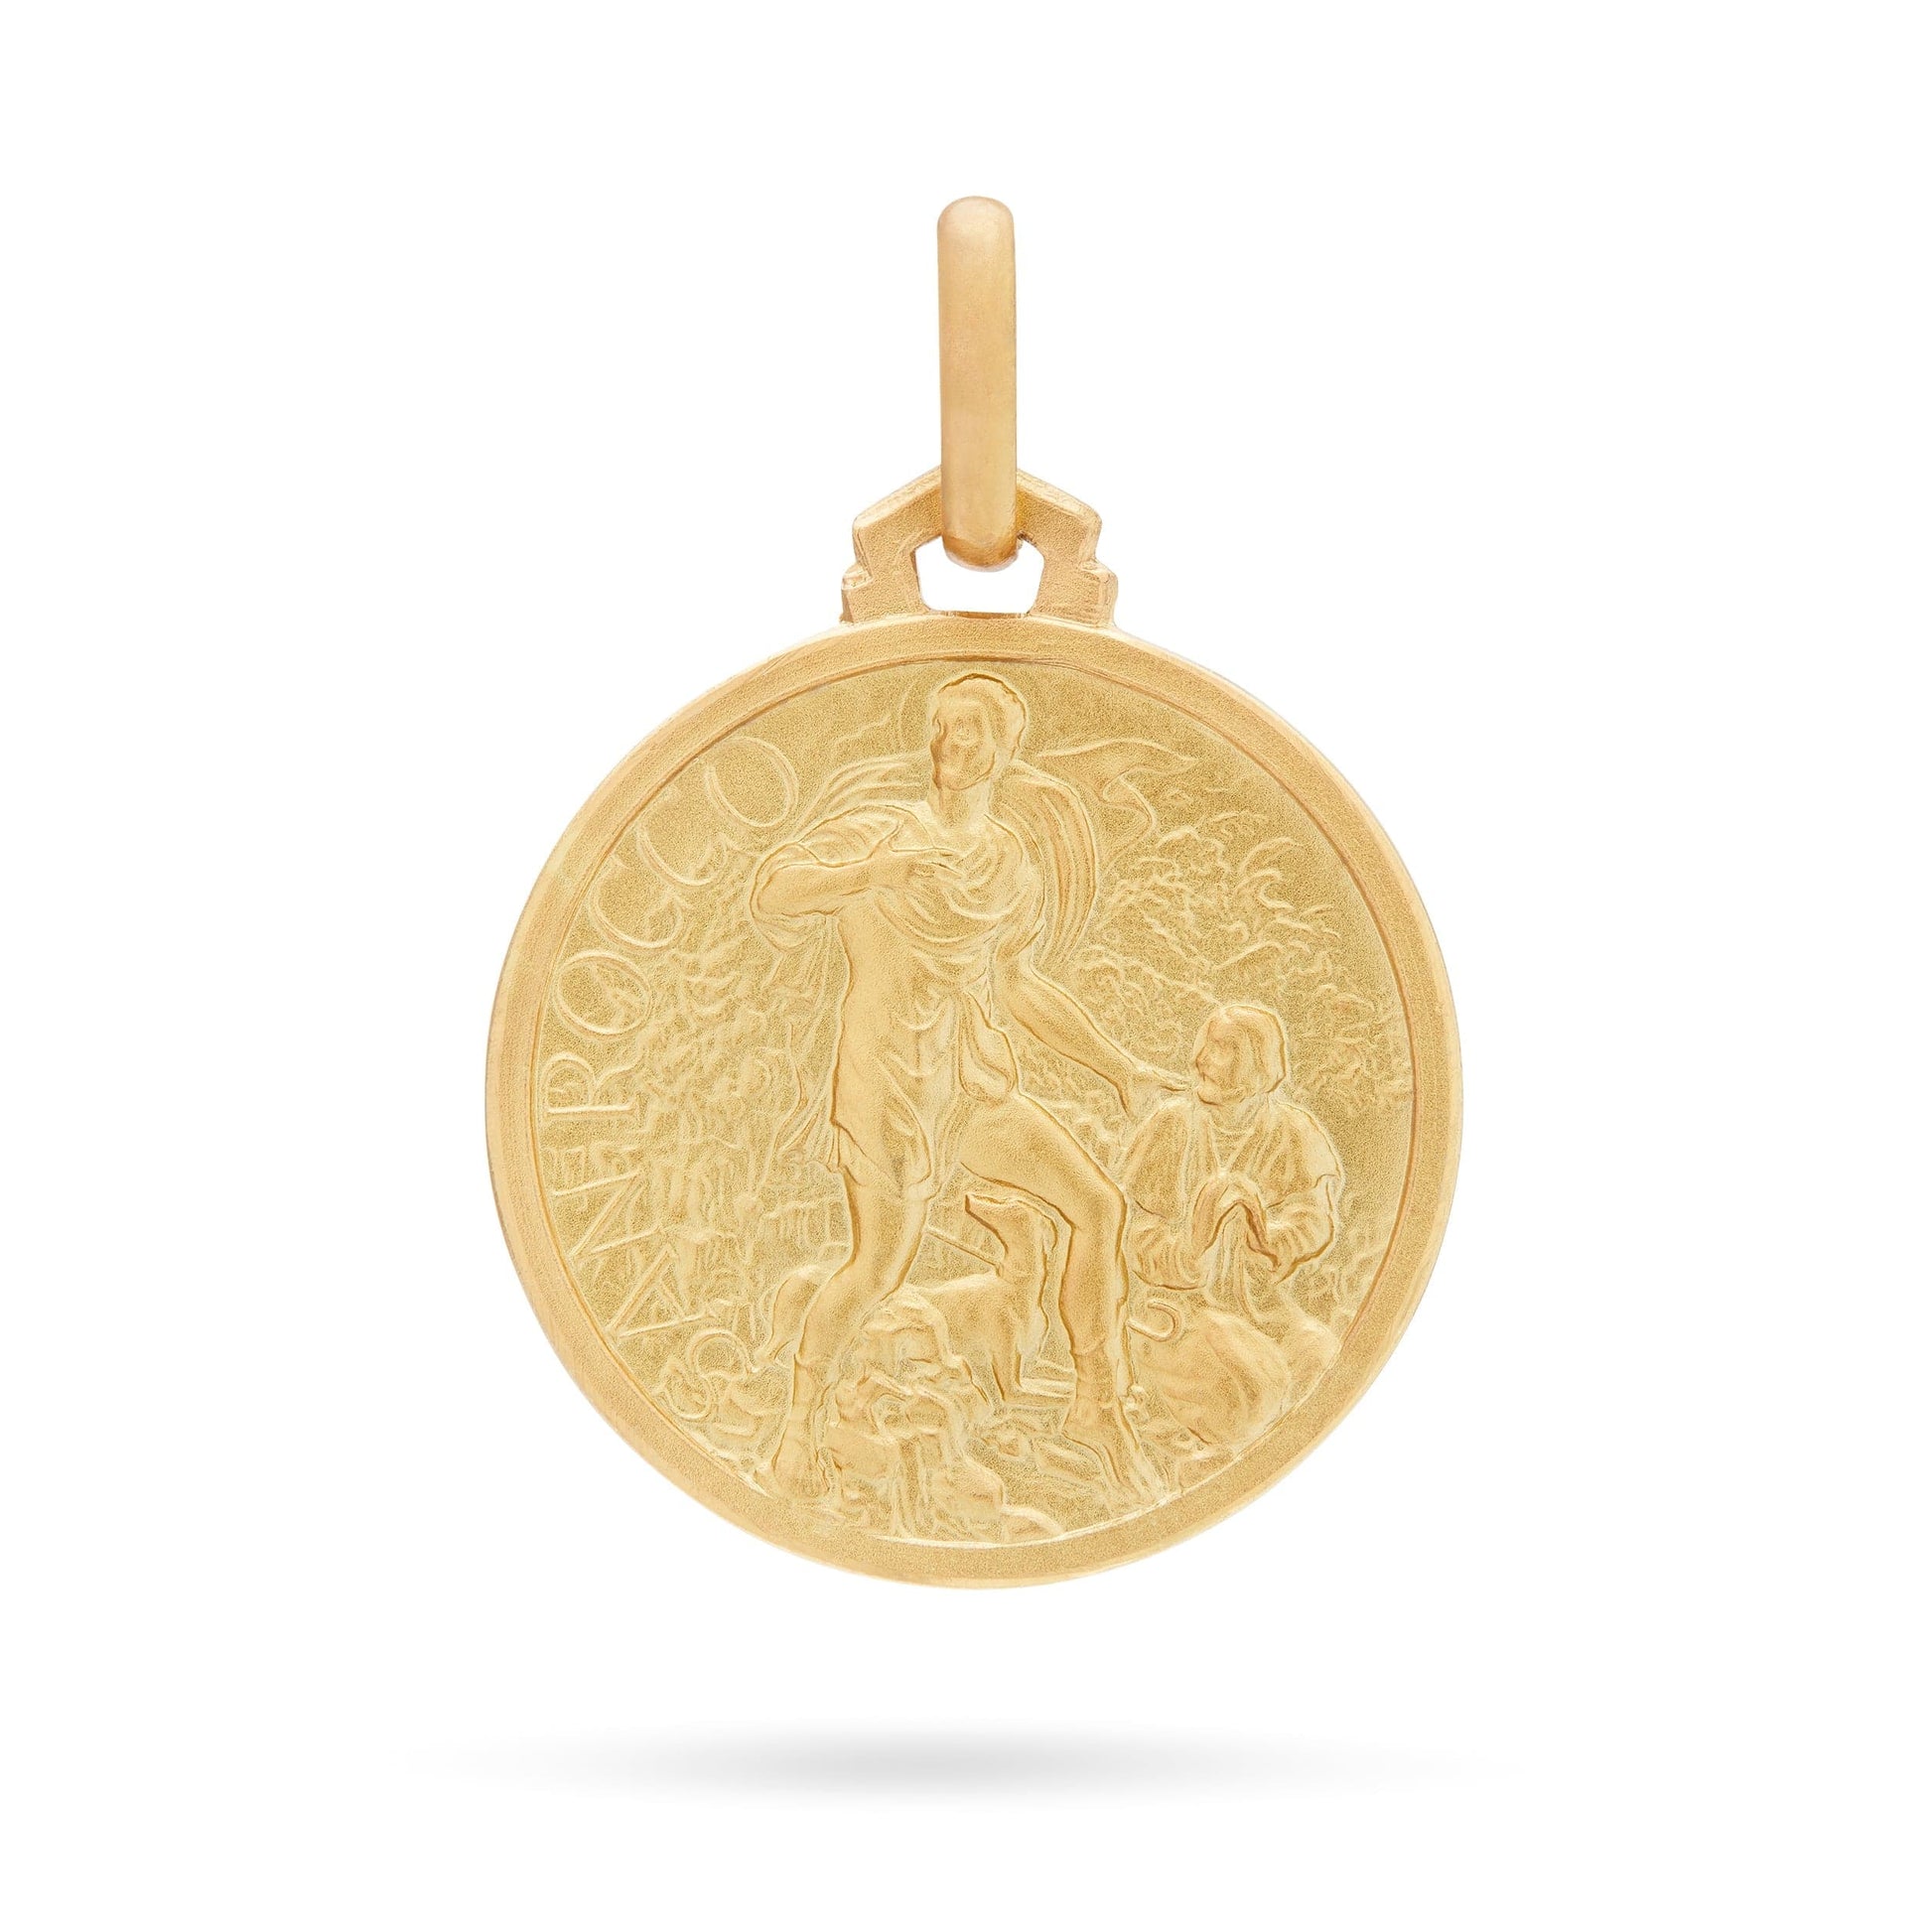 MONDO CATTOLICO Medal 14 mm (0.55 in) Gold medal of Saint Roch